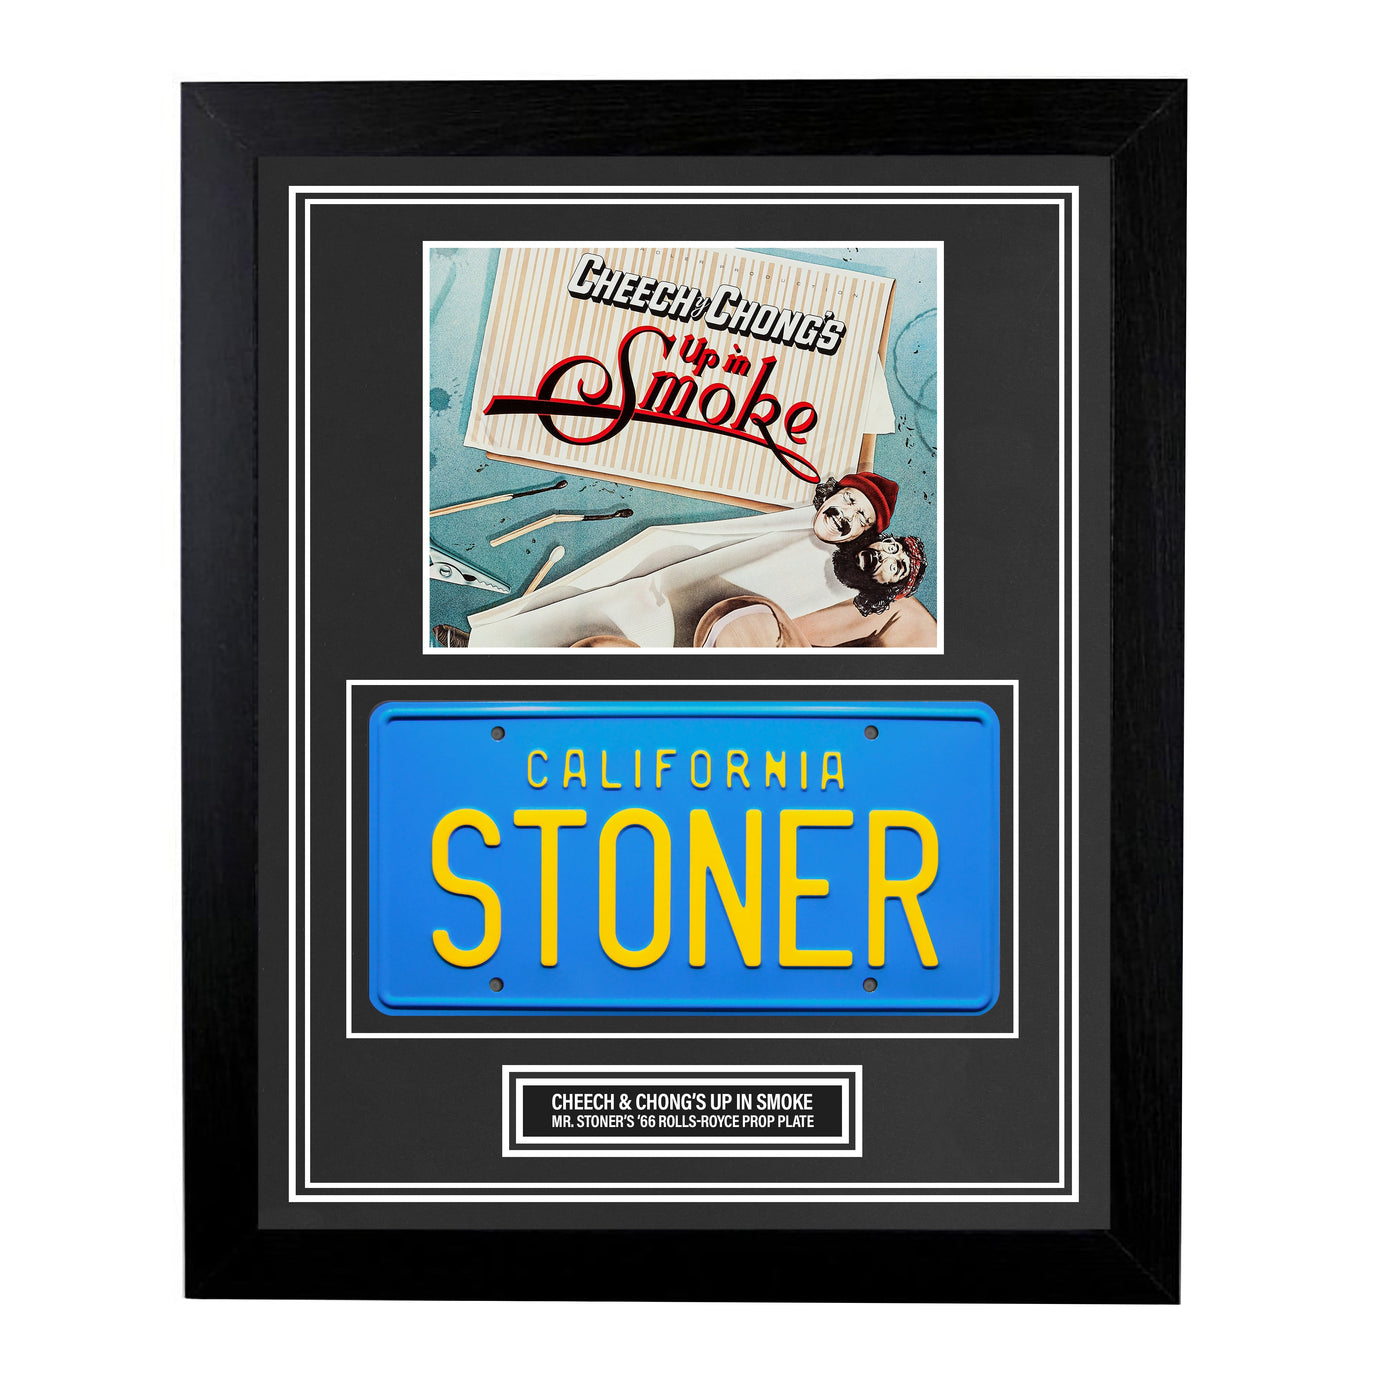 Cheech and Chong's Up in Smoke Custom Framed Stoner License Plate Prop Wall Display